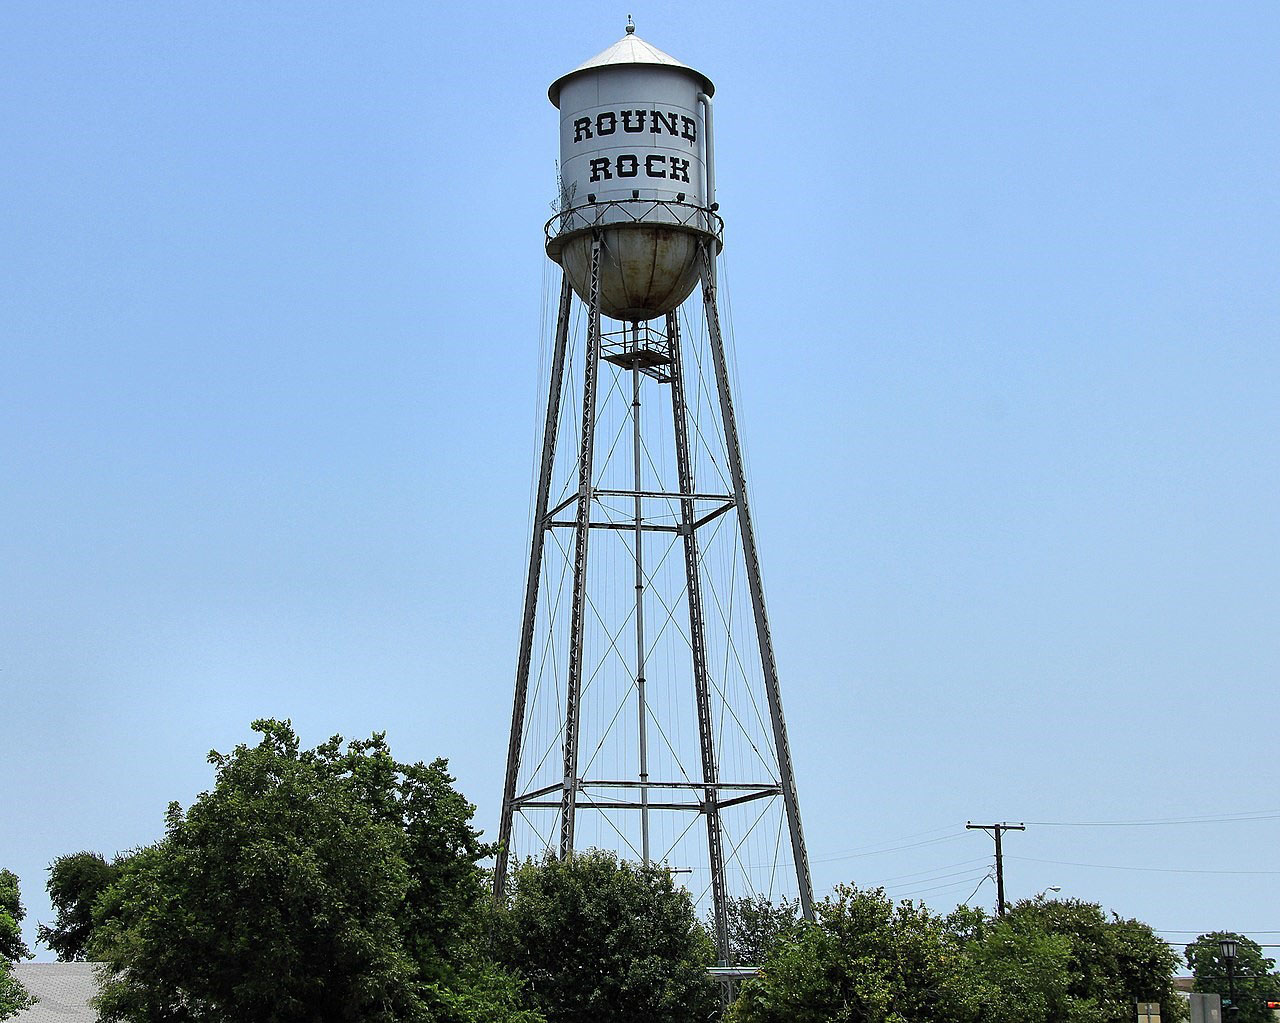 historic water tower north of Austin, Texas